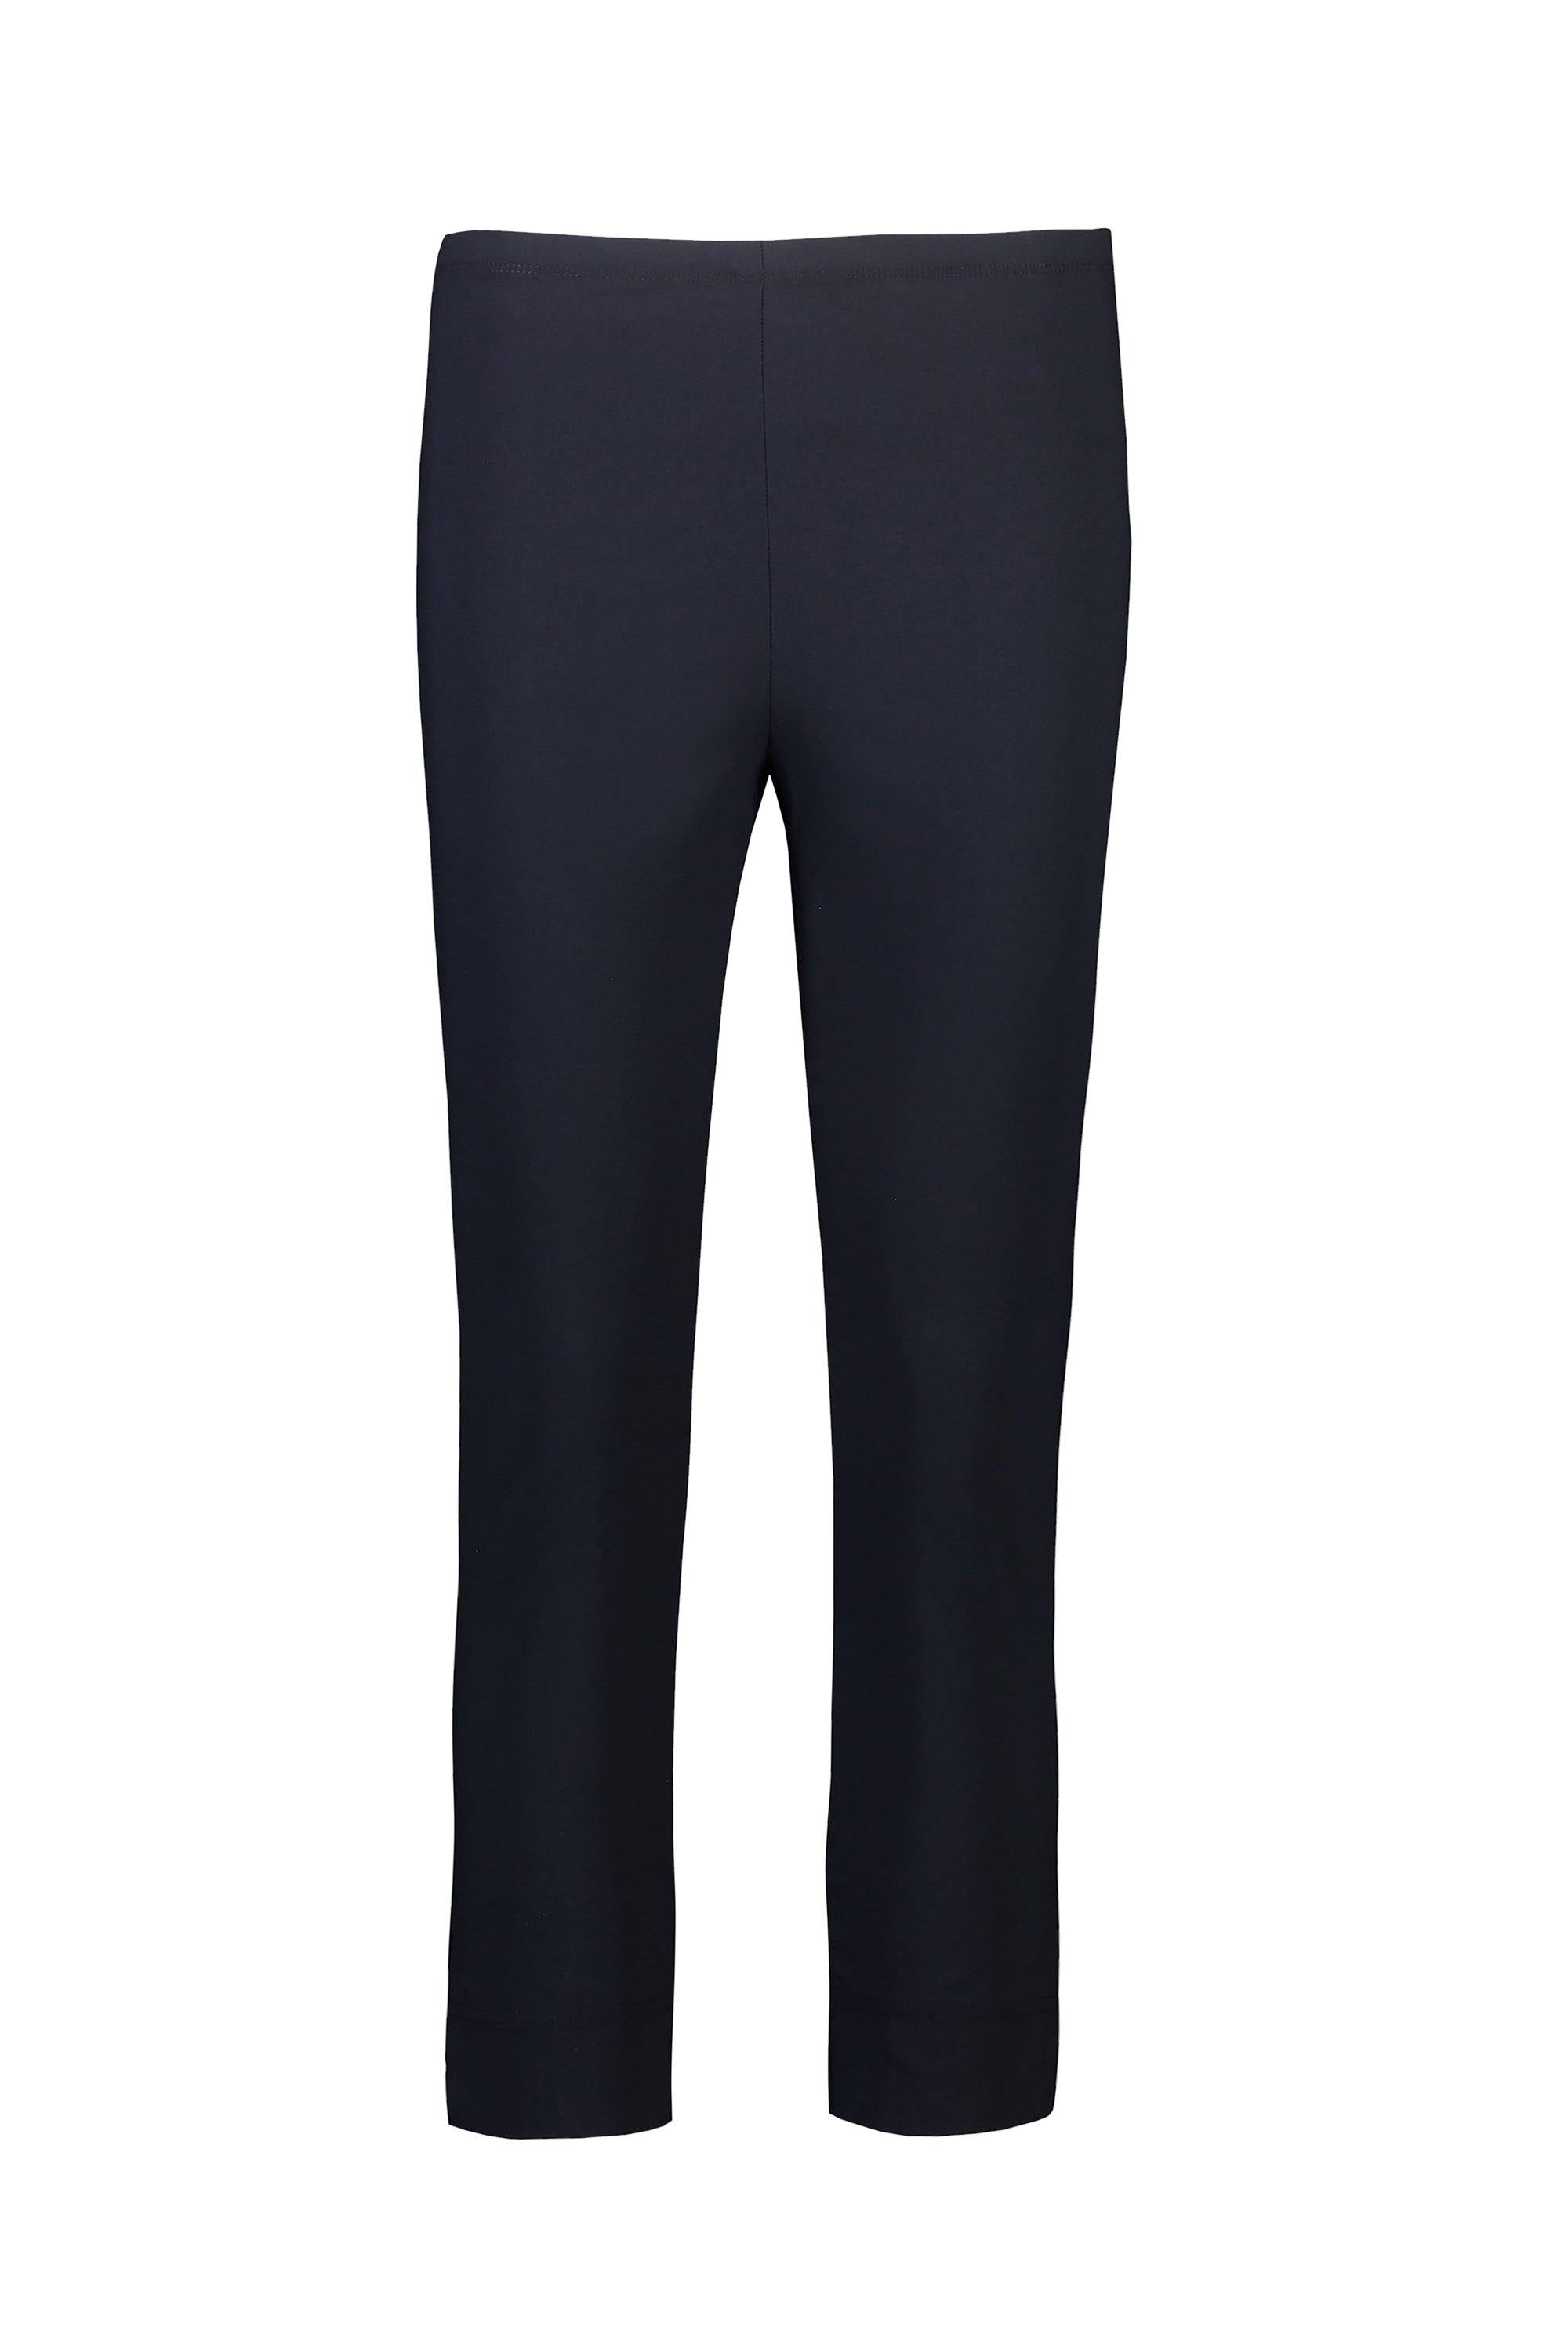 Acrobat Eclipse Pant - French Ink - Pant VERGE